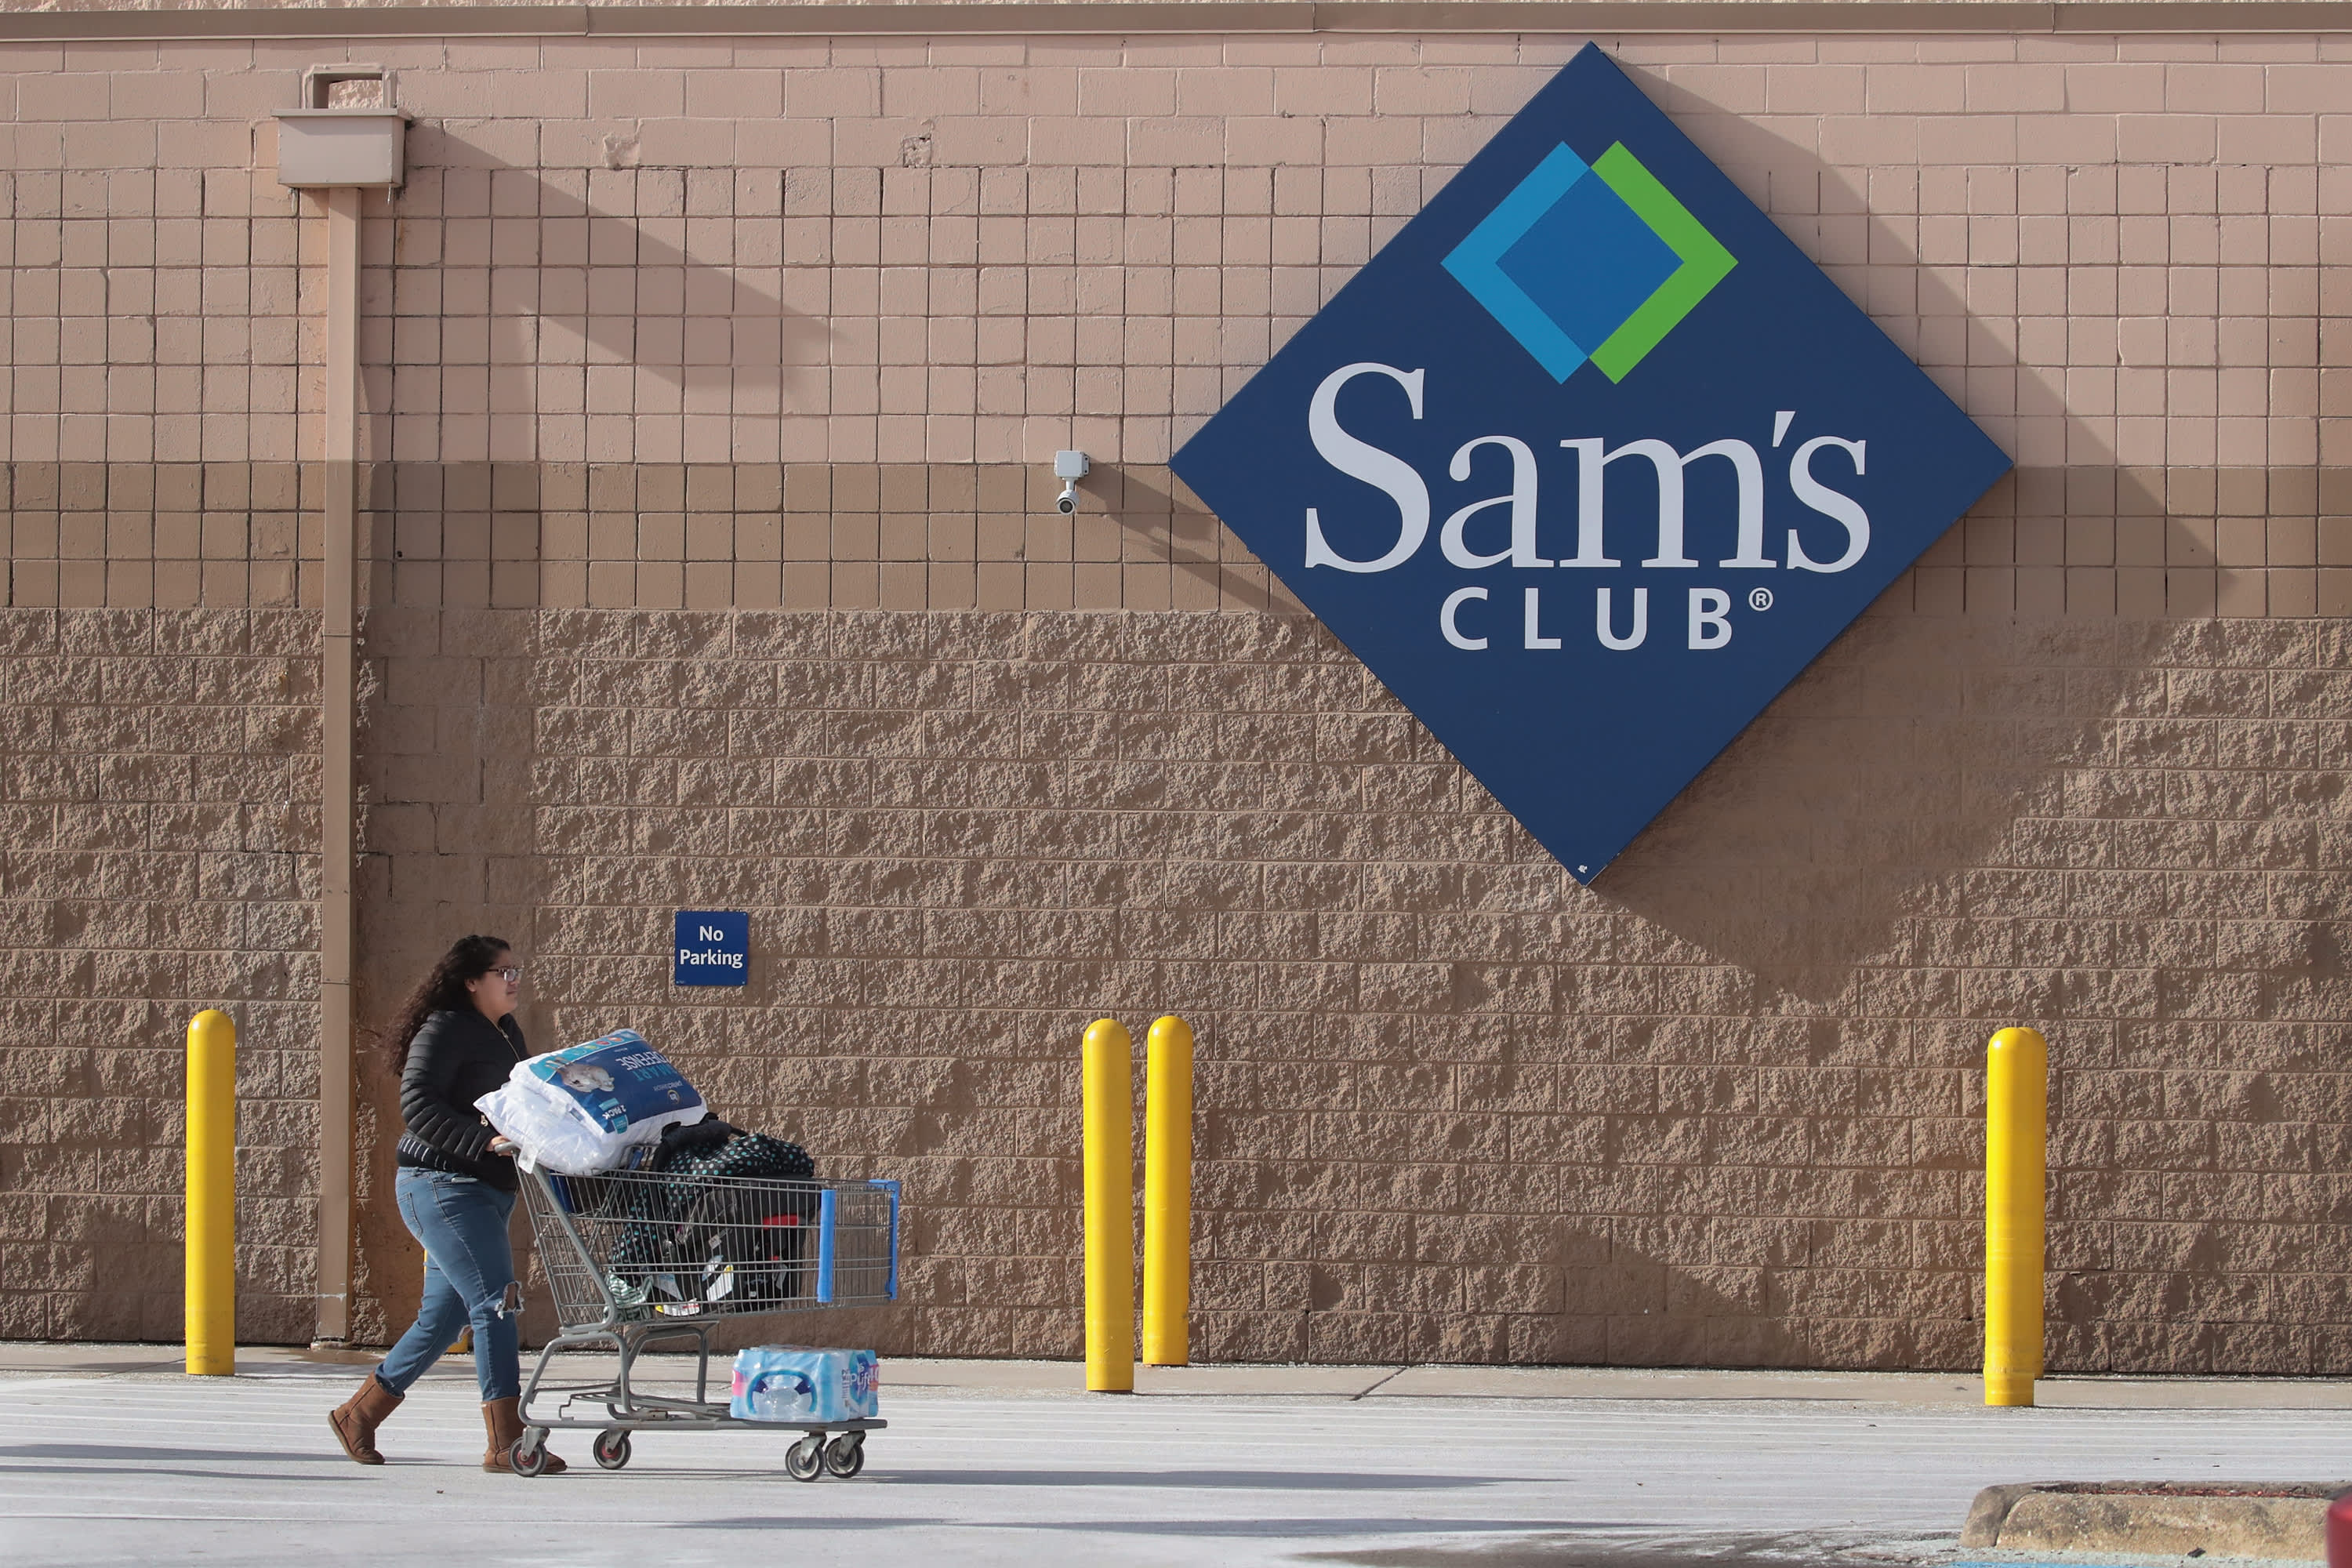 Walmart-owned Sam's Club plans to open new stores